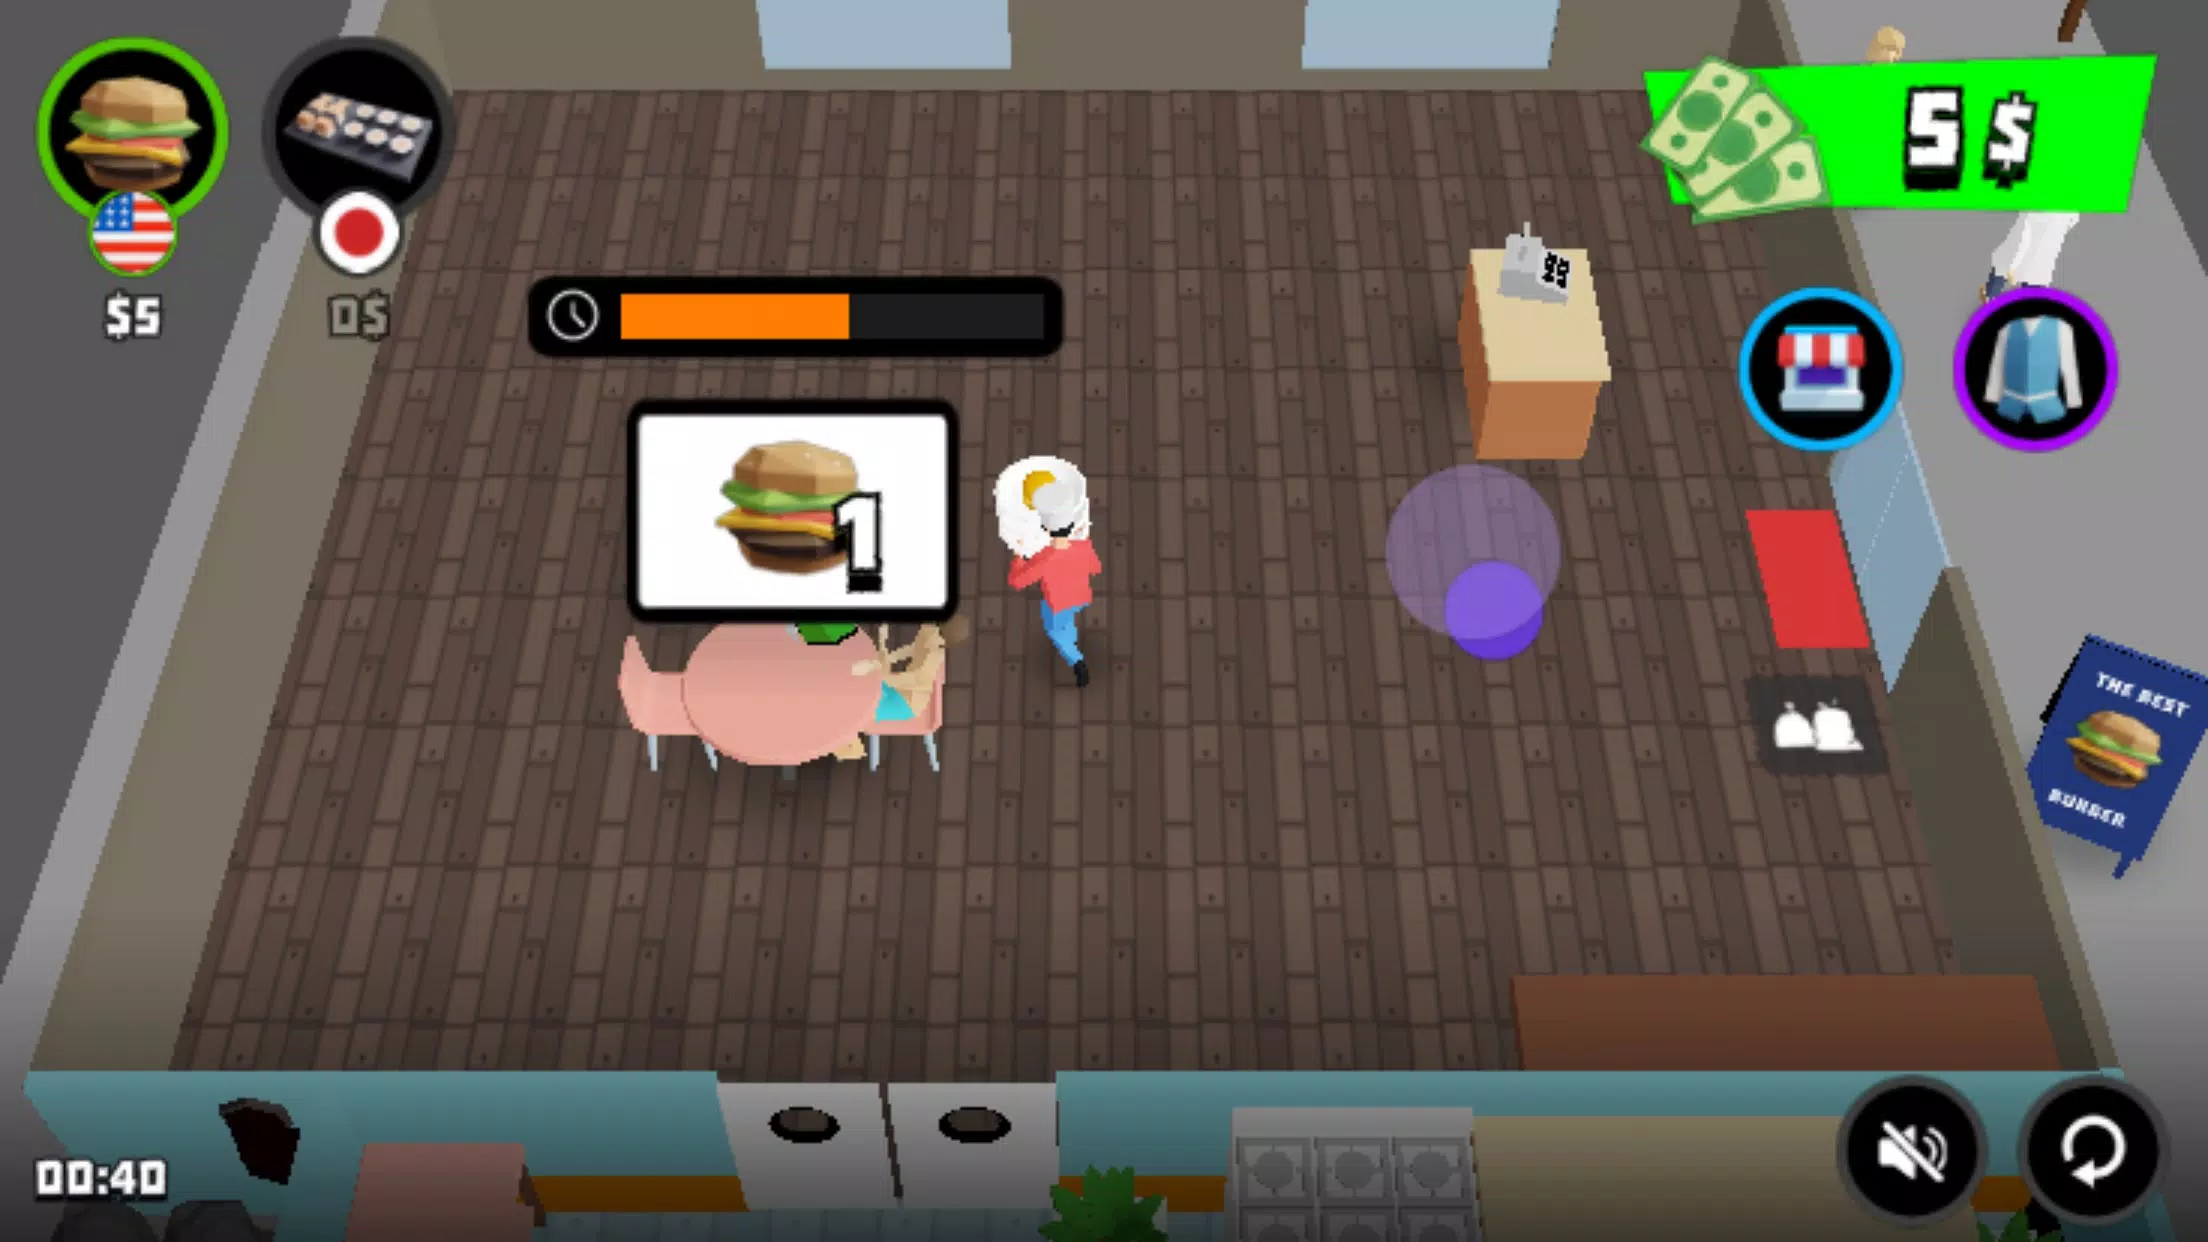 BURGER BOUNTY 🍔 - Play this Free Online Game Now!